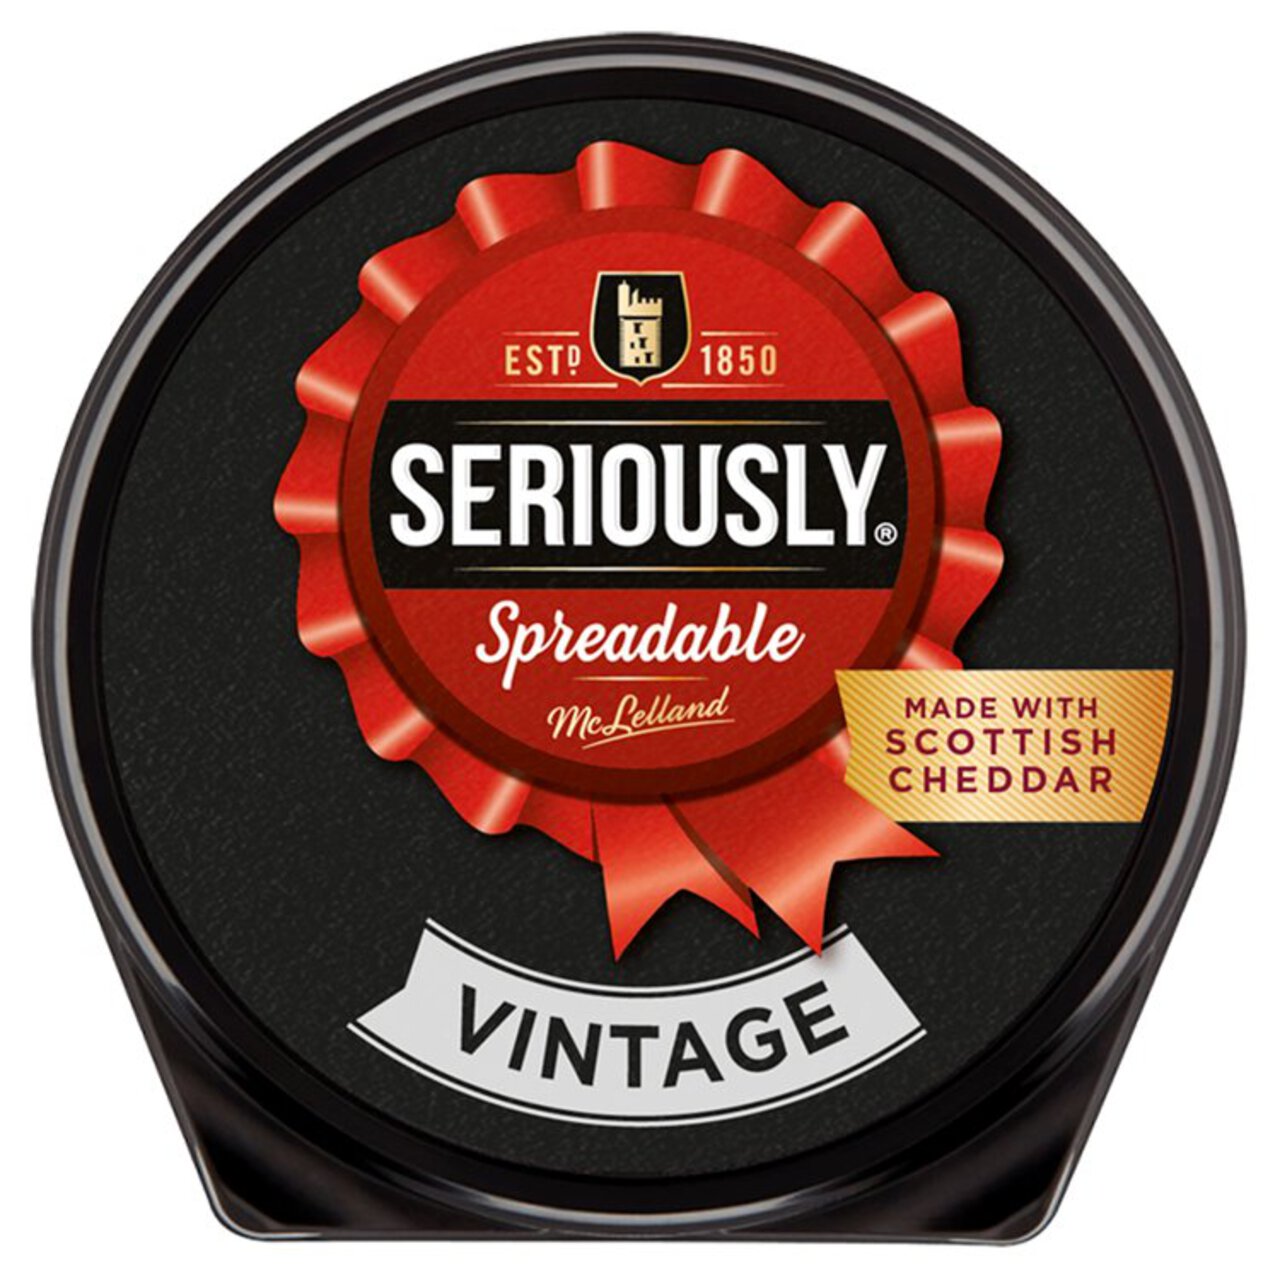 Seriously Spreadable Vintage Cheese Spread 125g